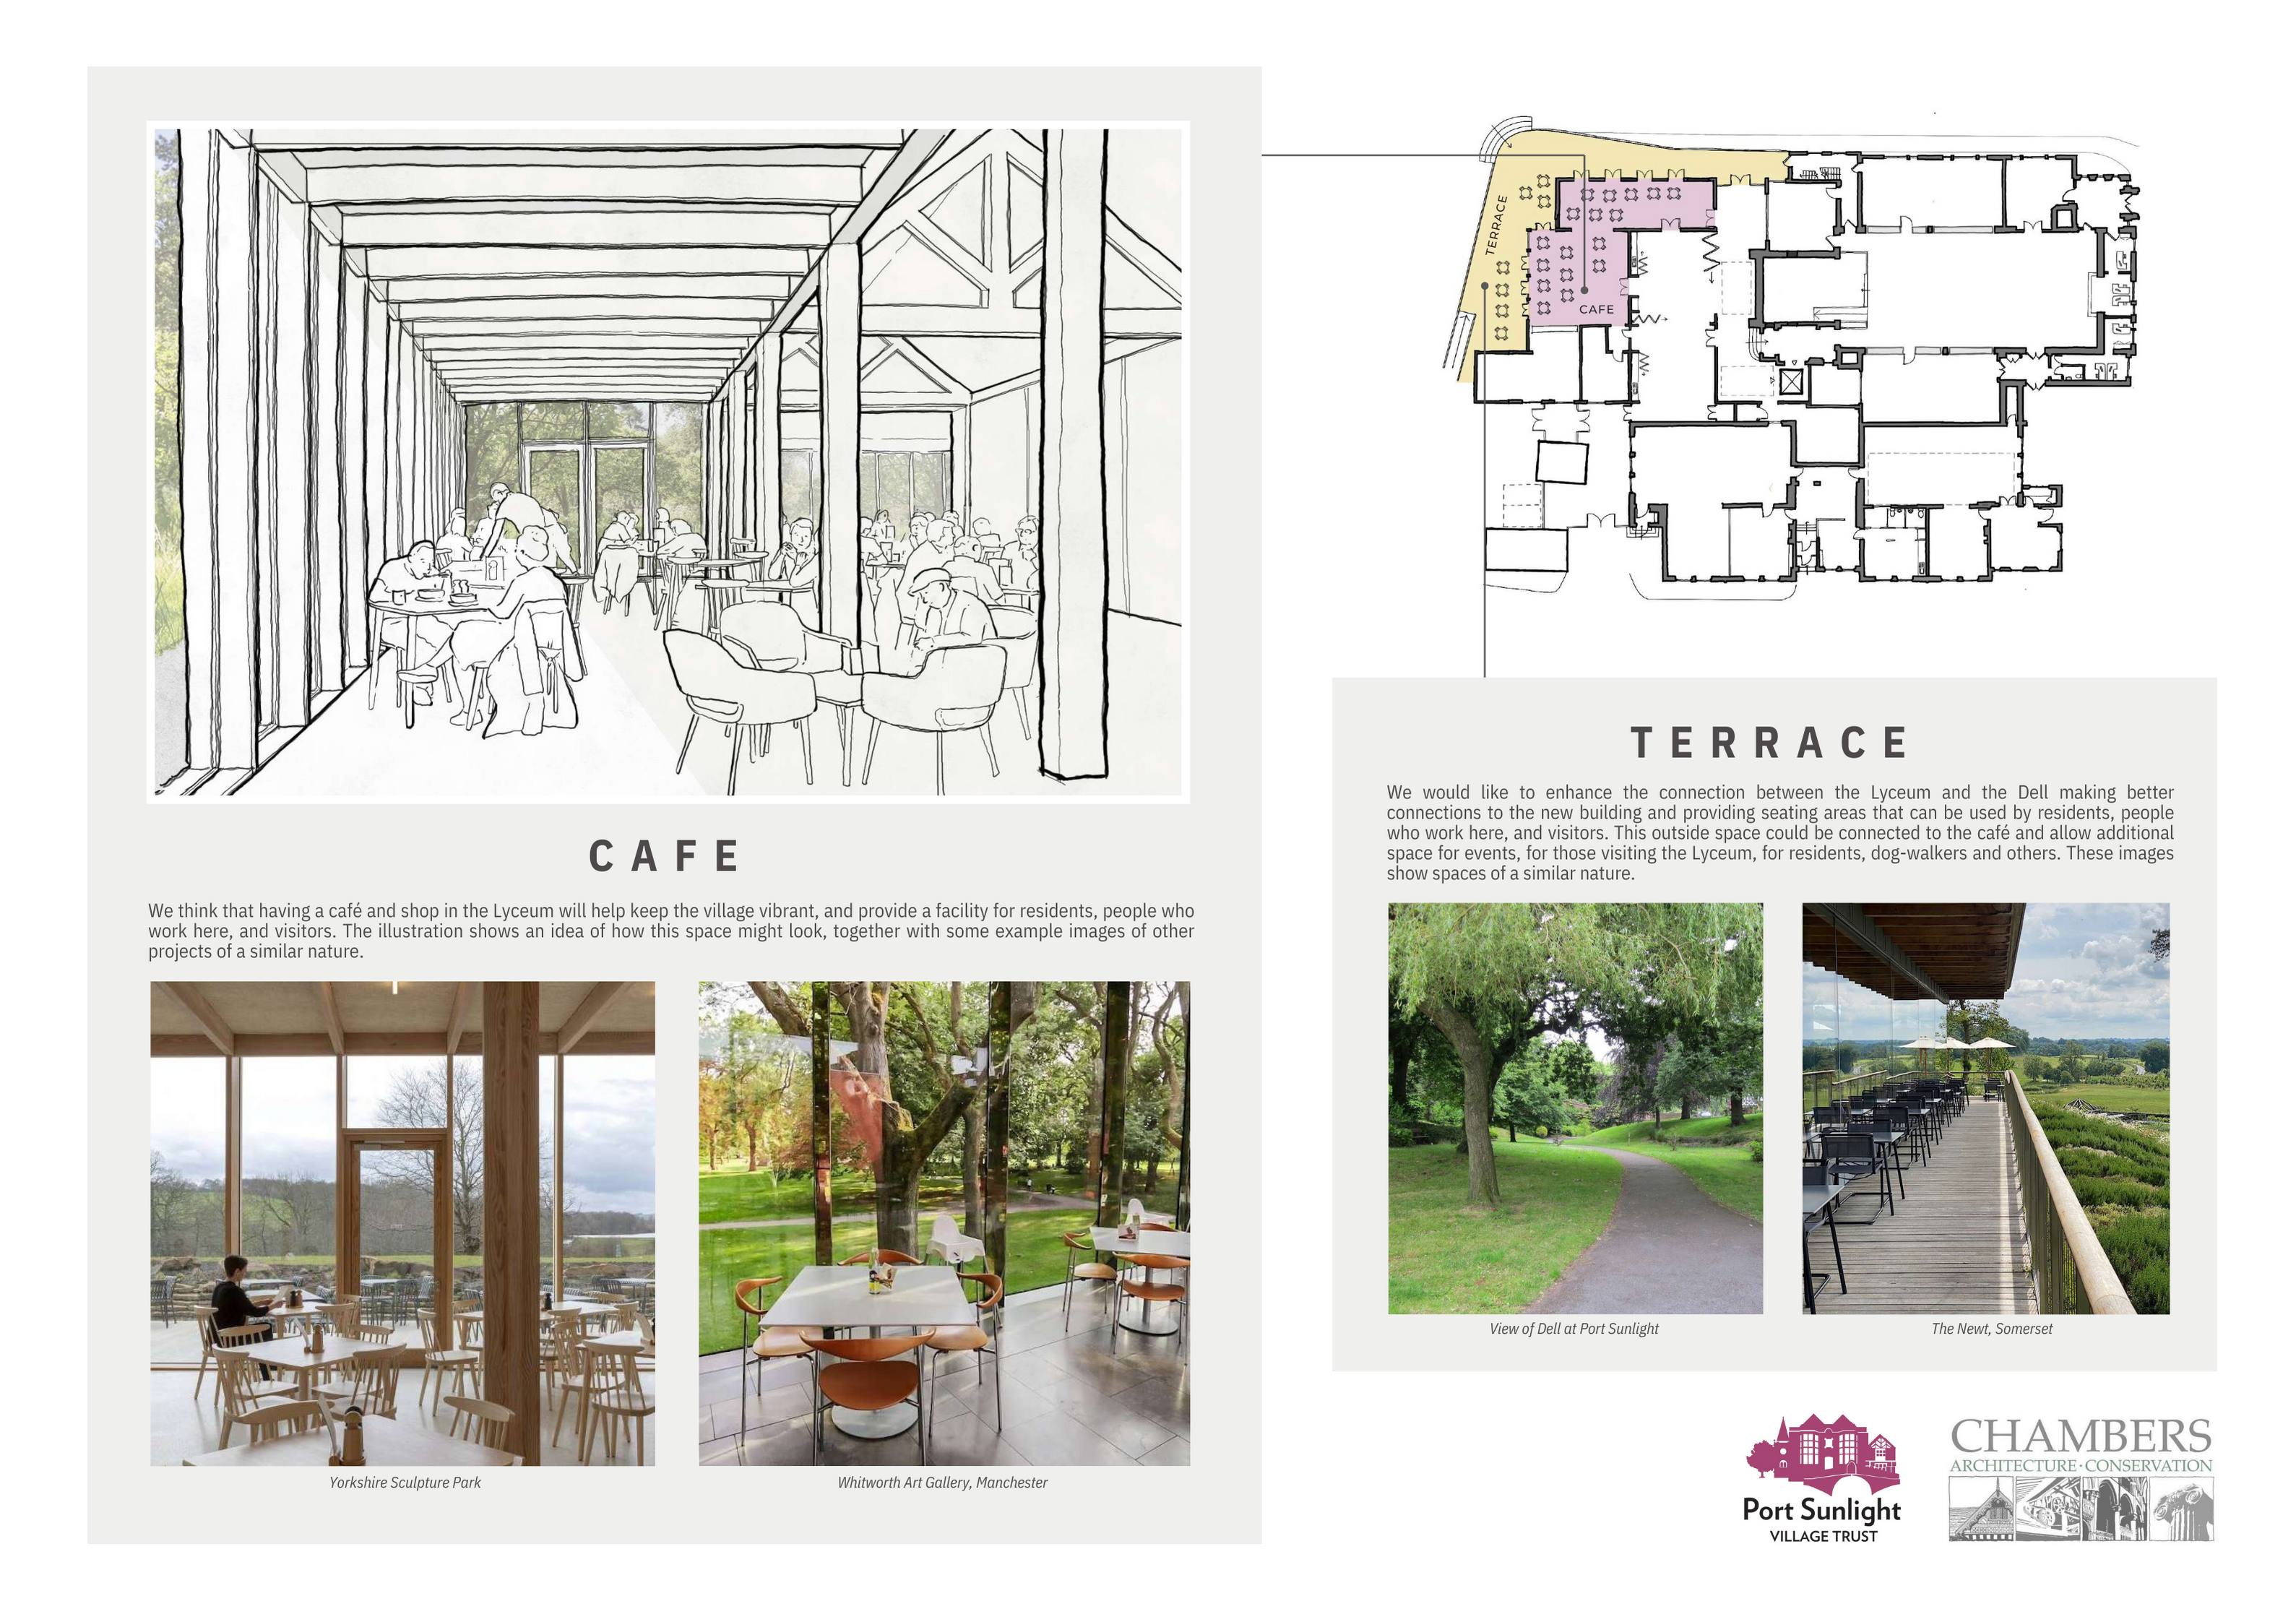 Cafe and Terrace Proposed Plans